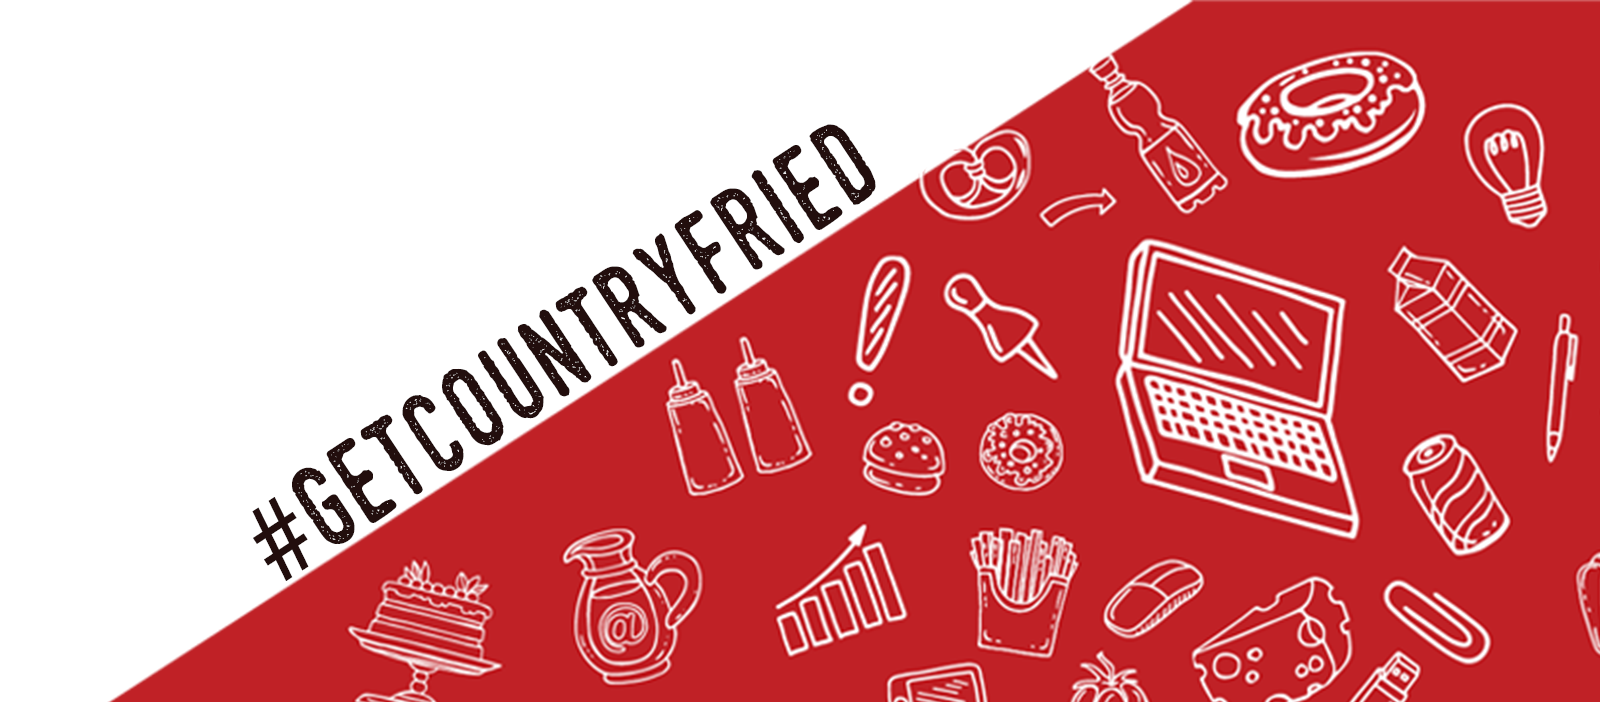 Country Fried Creative